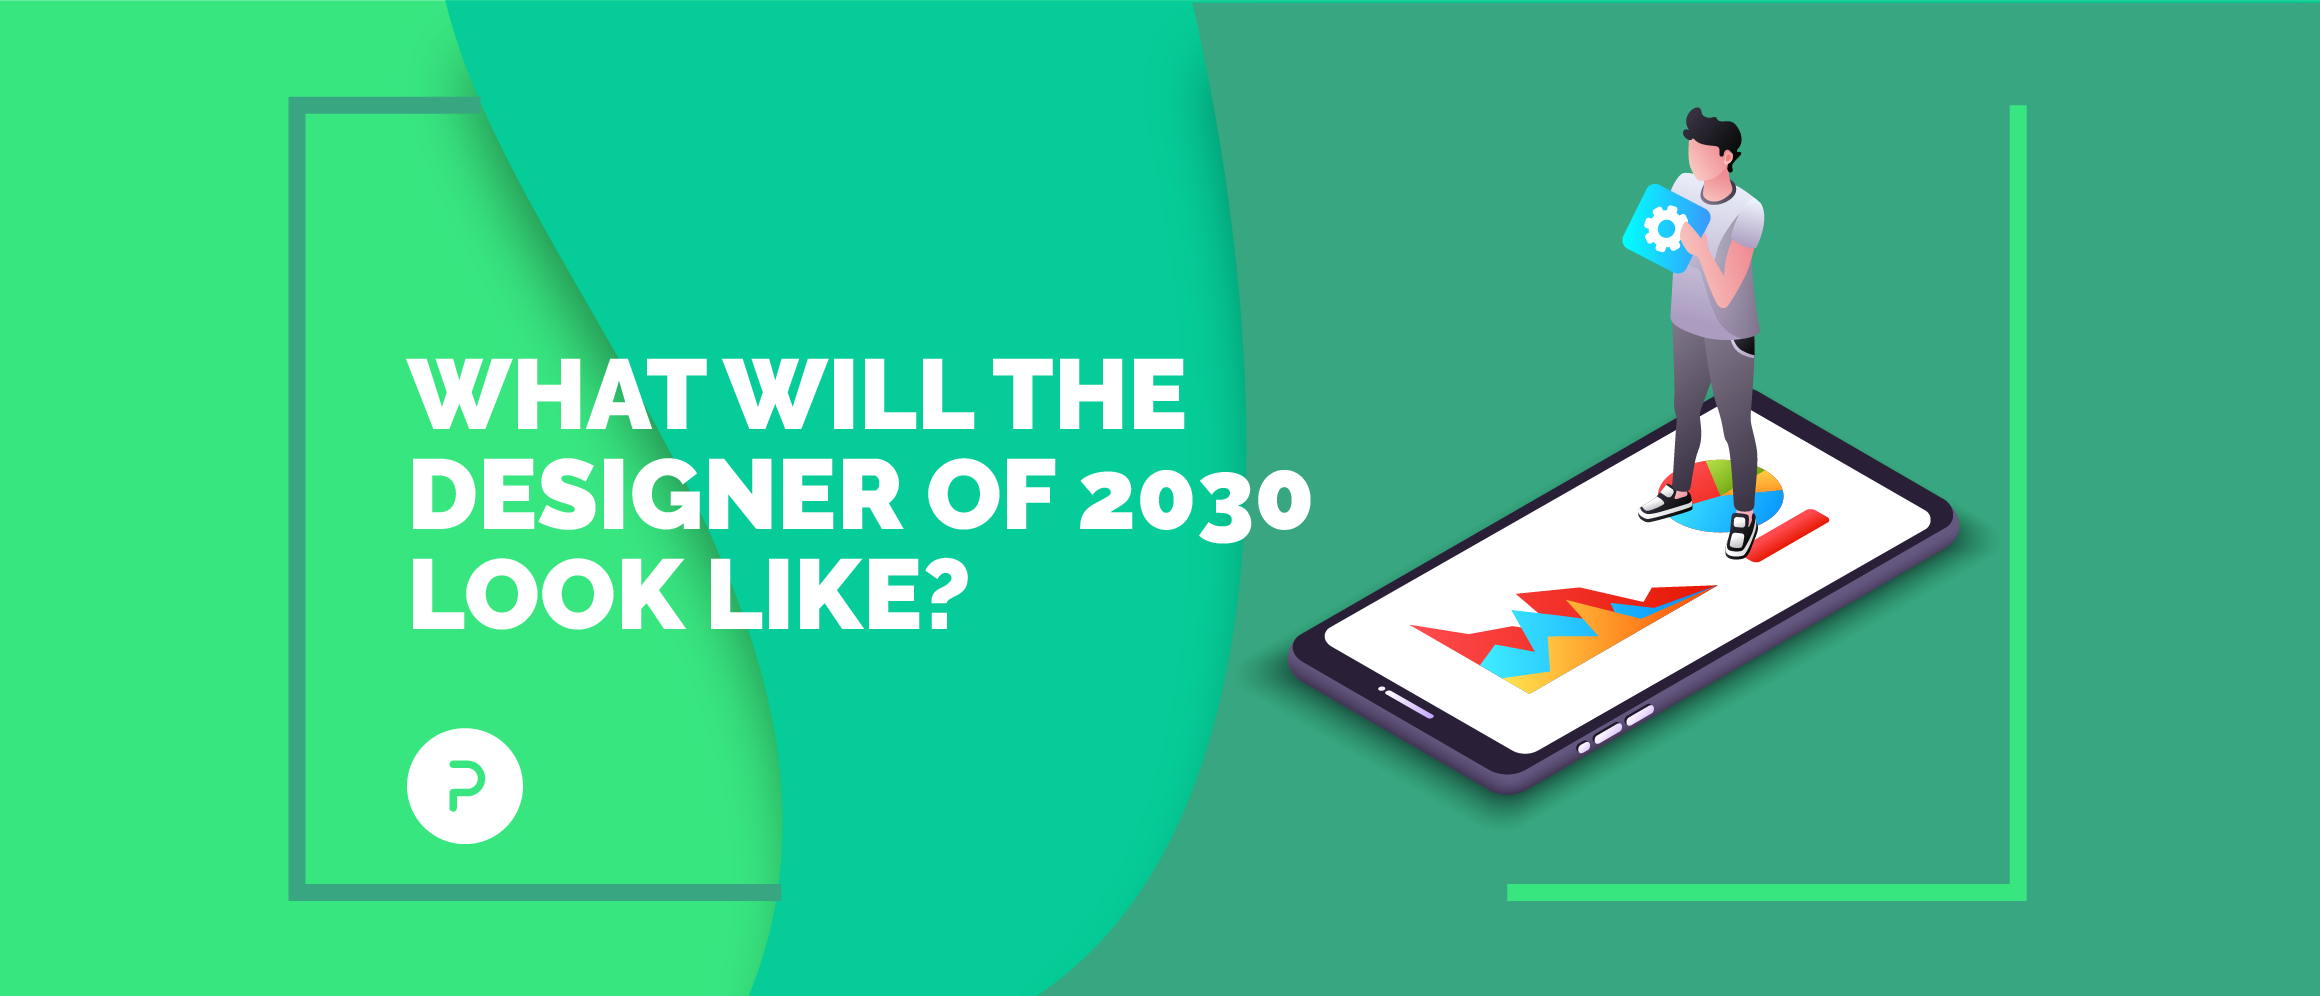 What will the designer of 2030 look like?